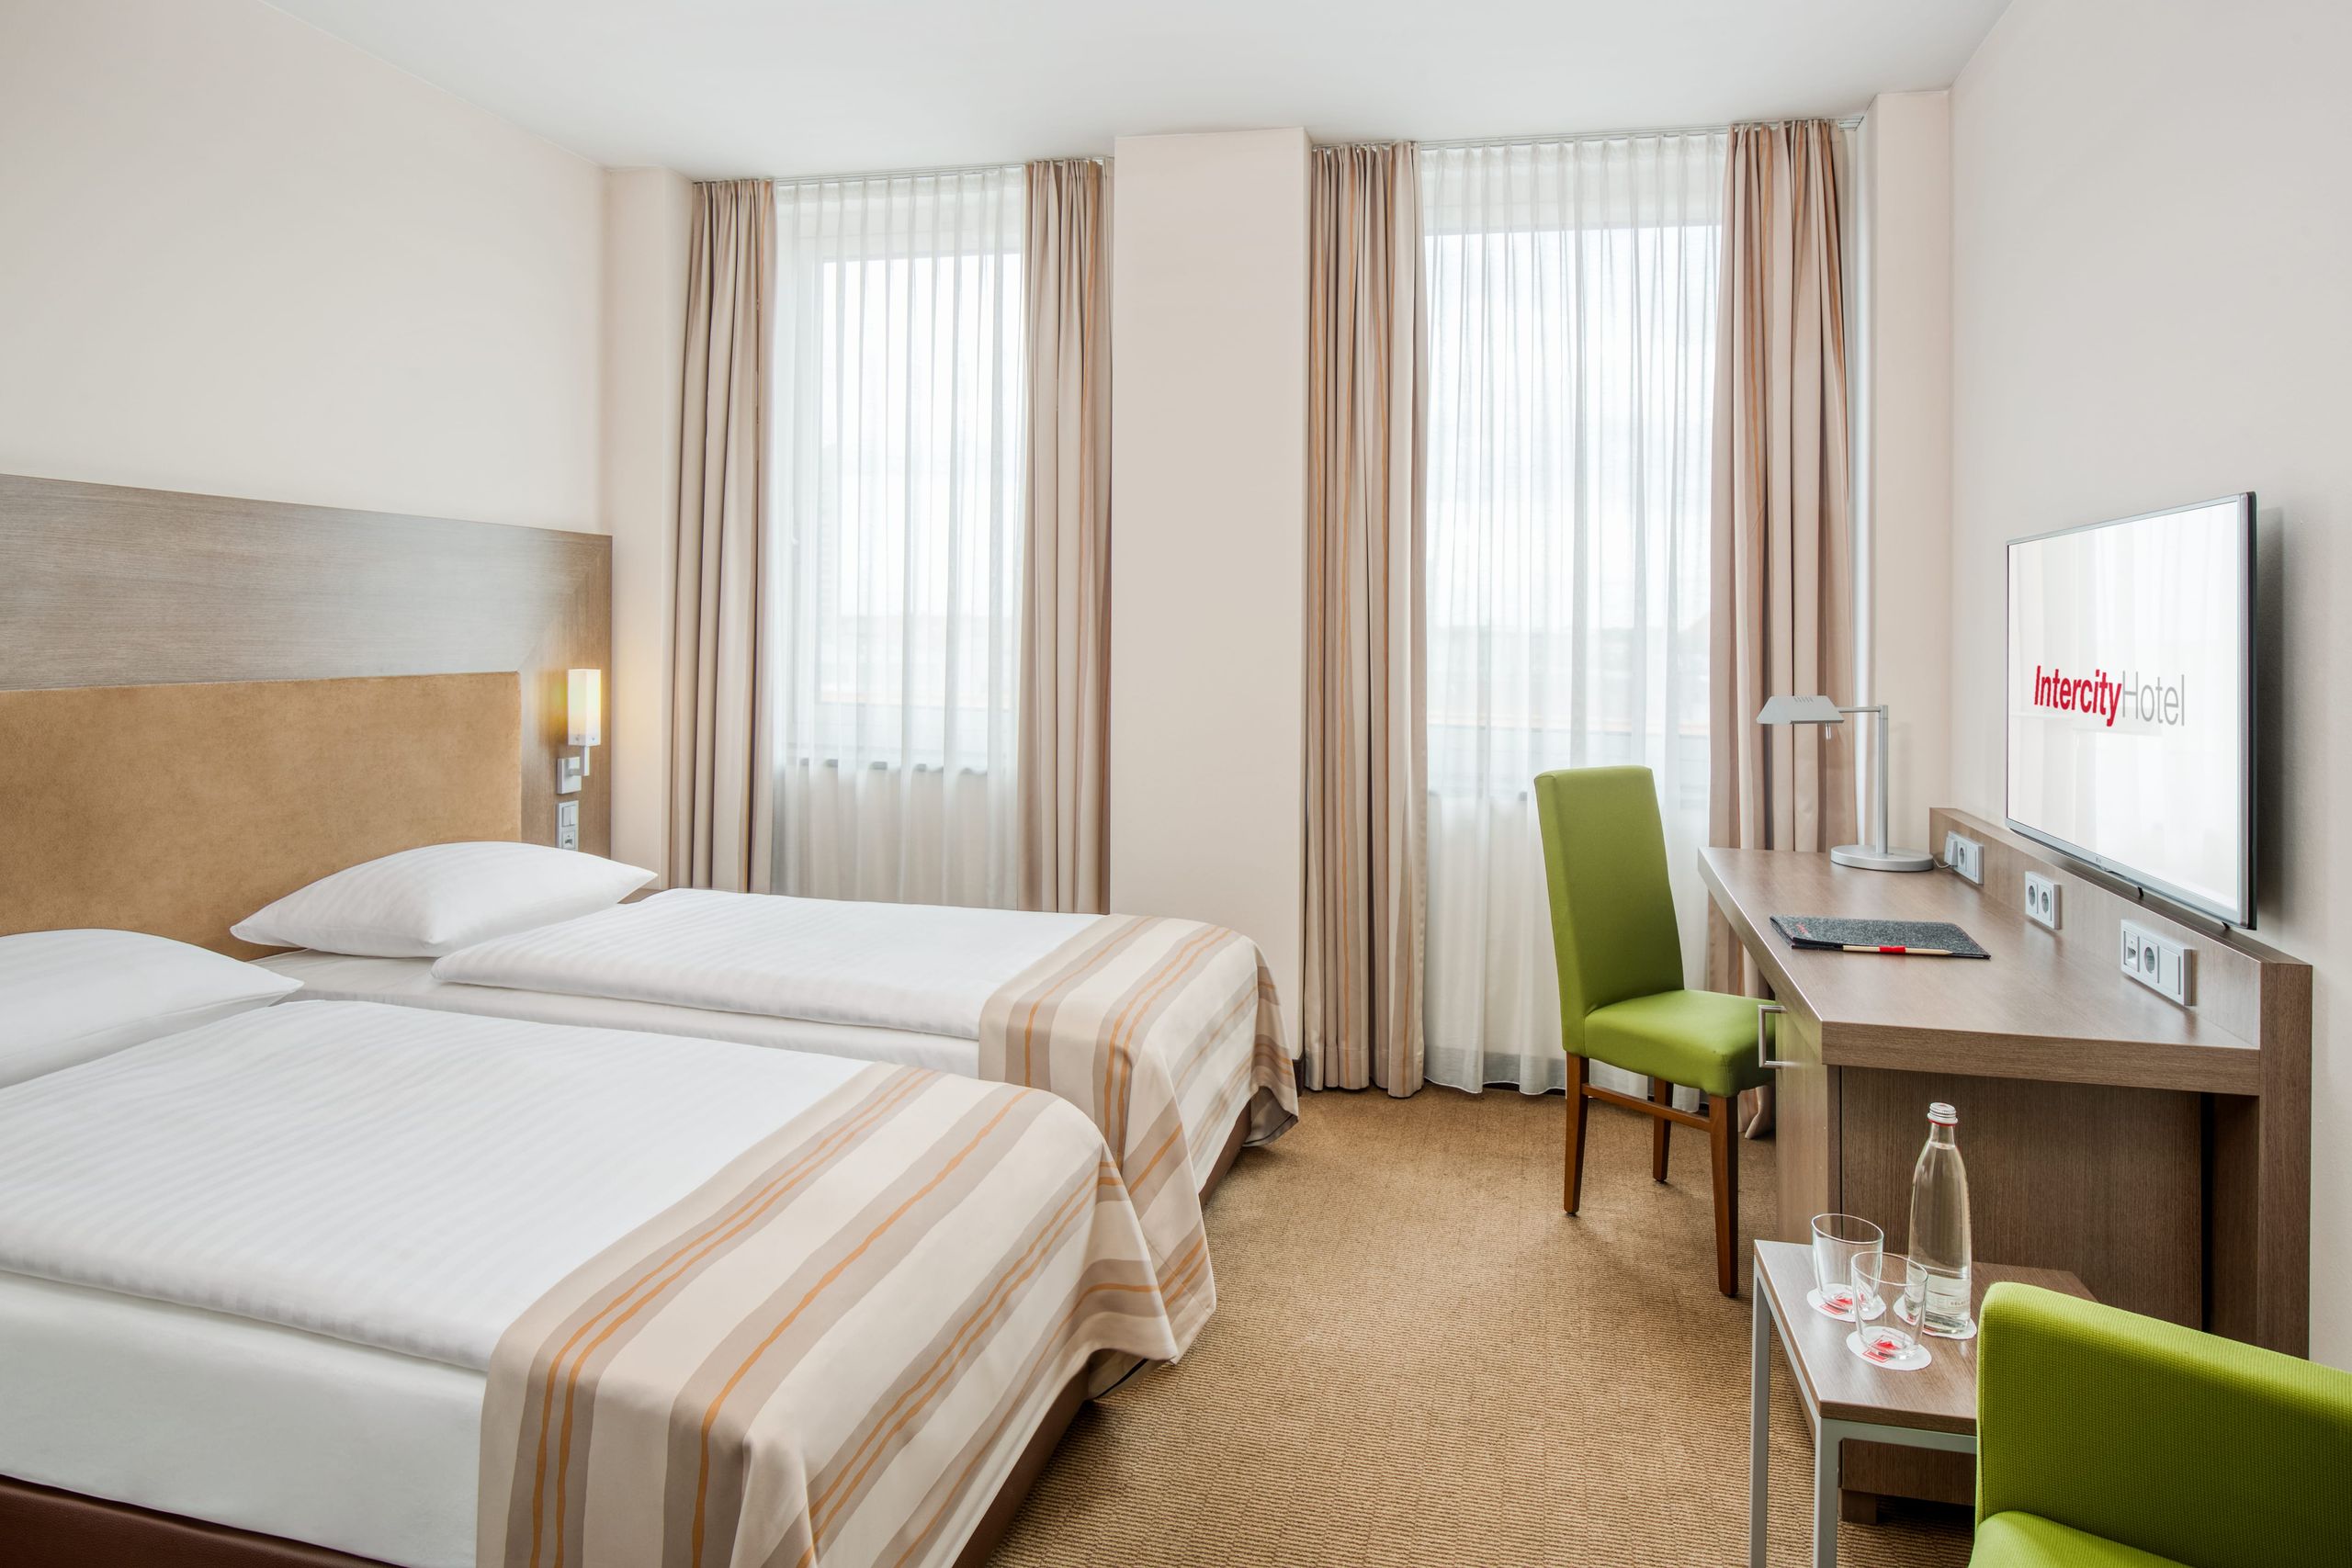 IntercityHotel Hannover - Business room with separate beds